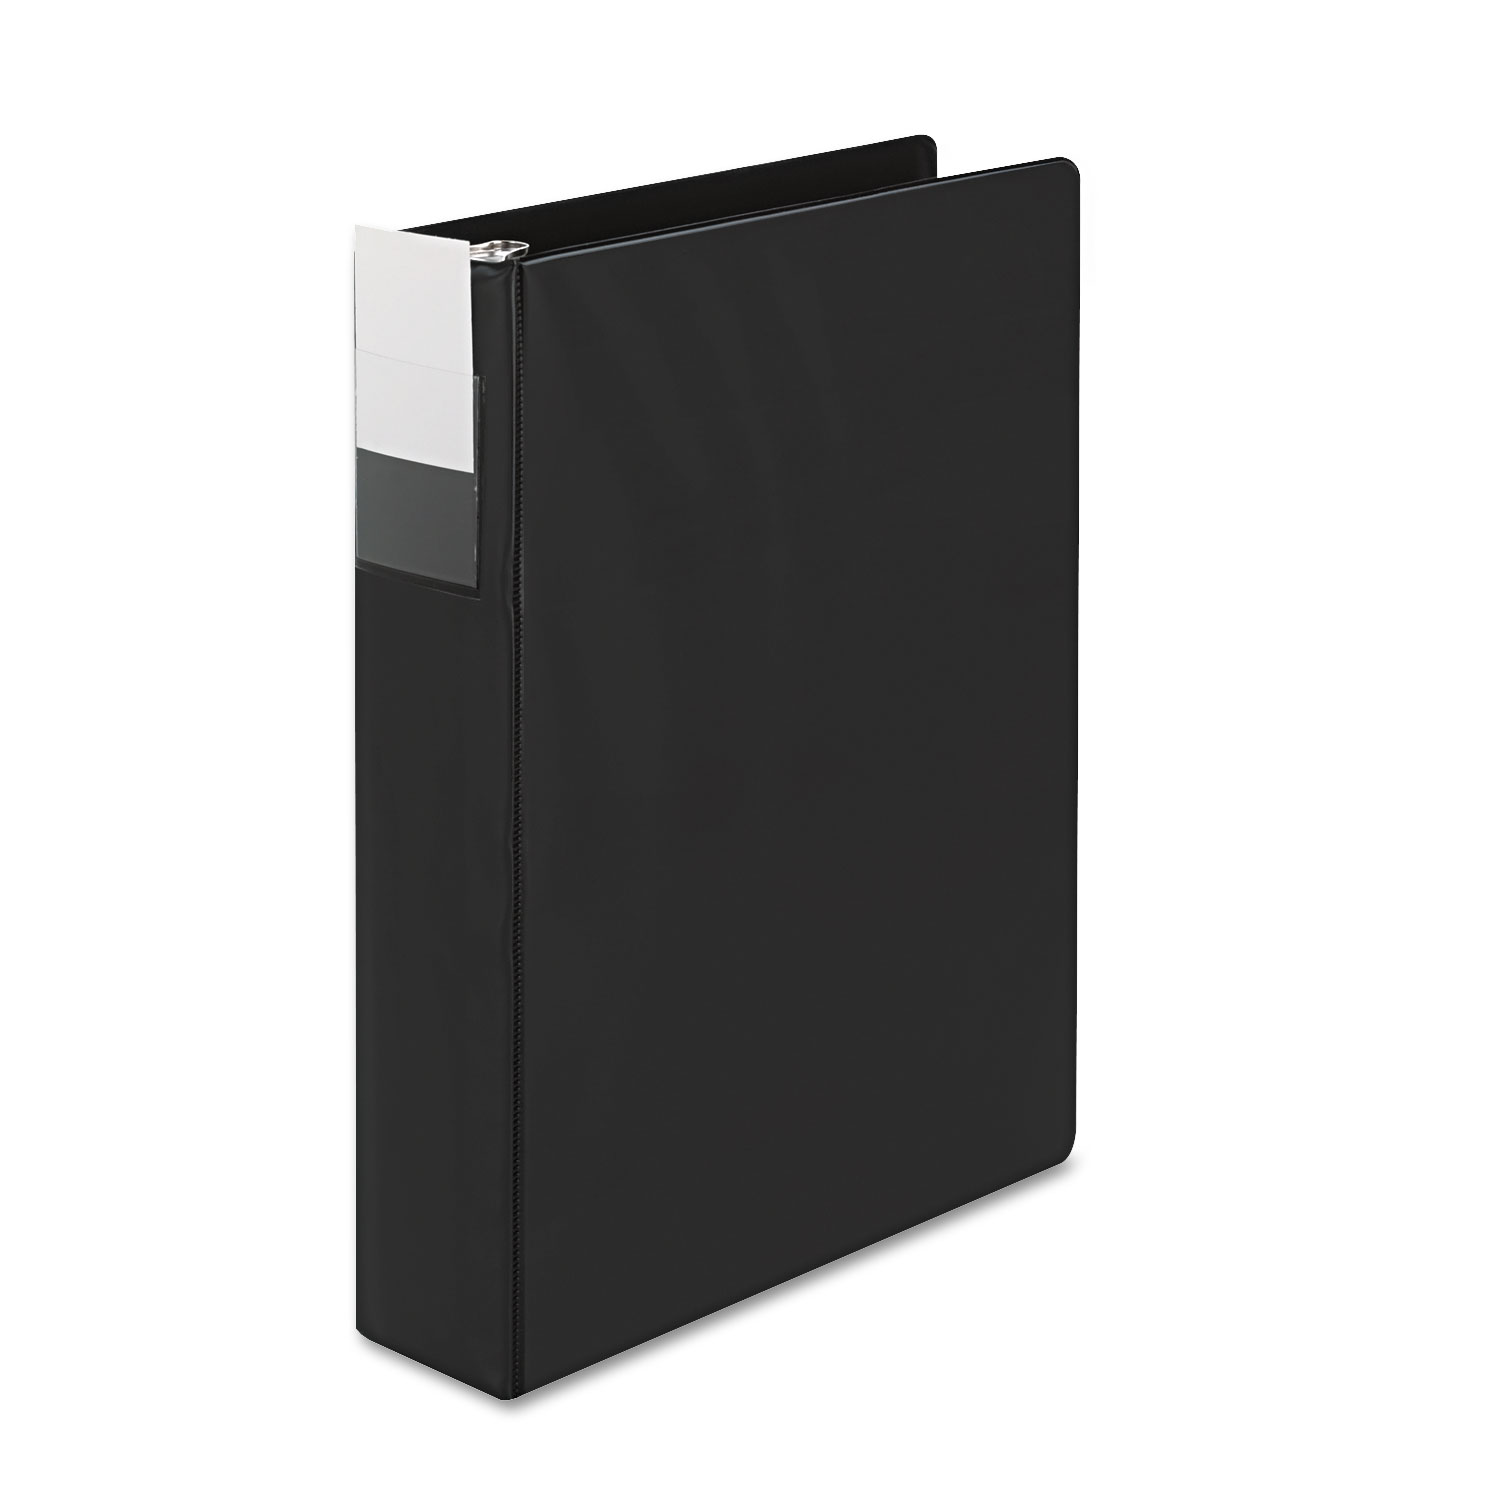  Avery 06120 Legal Durable Non-View Binder with Round Rings, 4 Rings, 2 Capacity, 14 x 8.5, Black (AVE06120) 